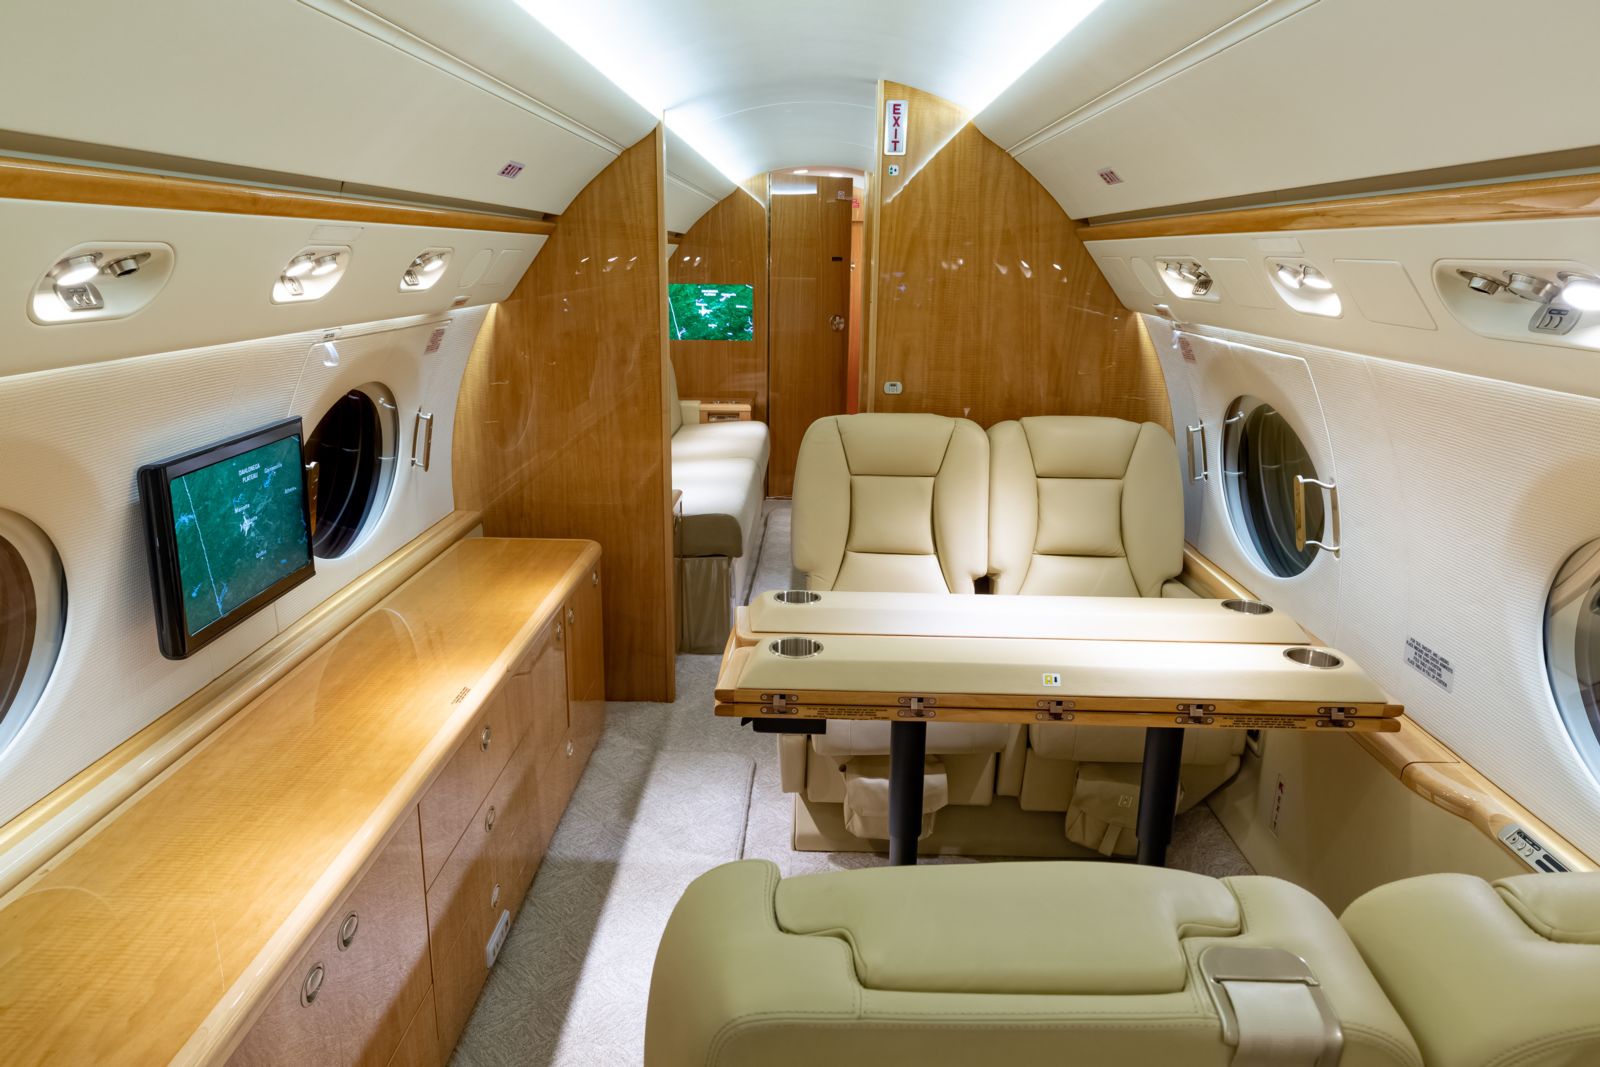 Gulfstream G550  S/N 5370 for sale | gallery image: /userfiles/images/G550_sn5370/mid%20aft.jpg